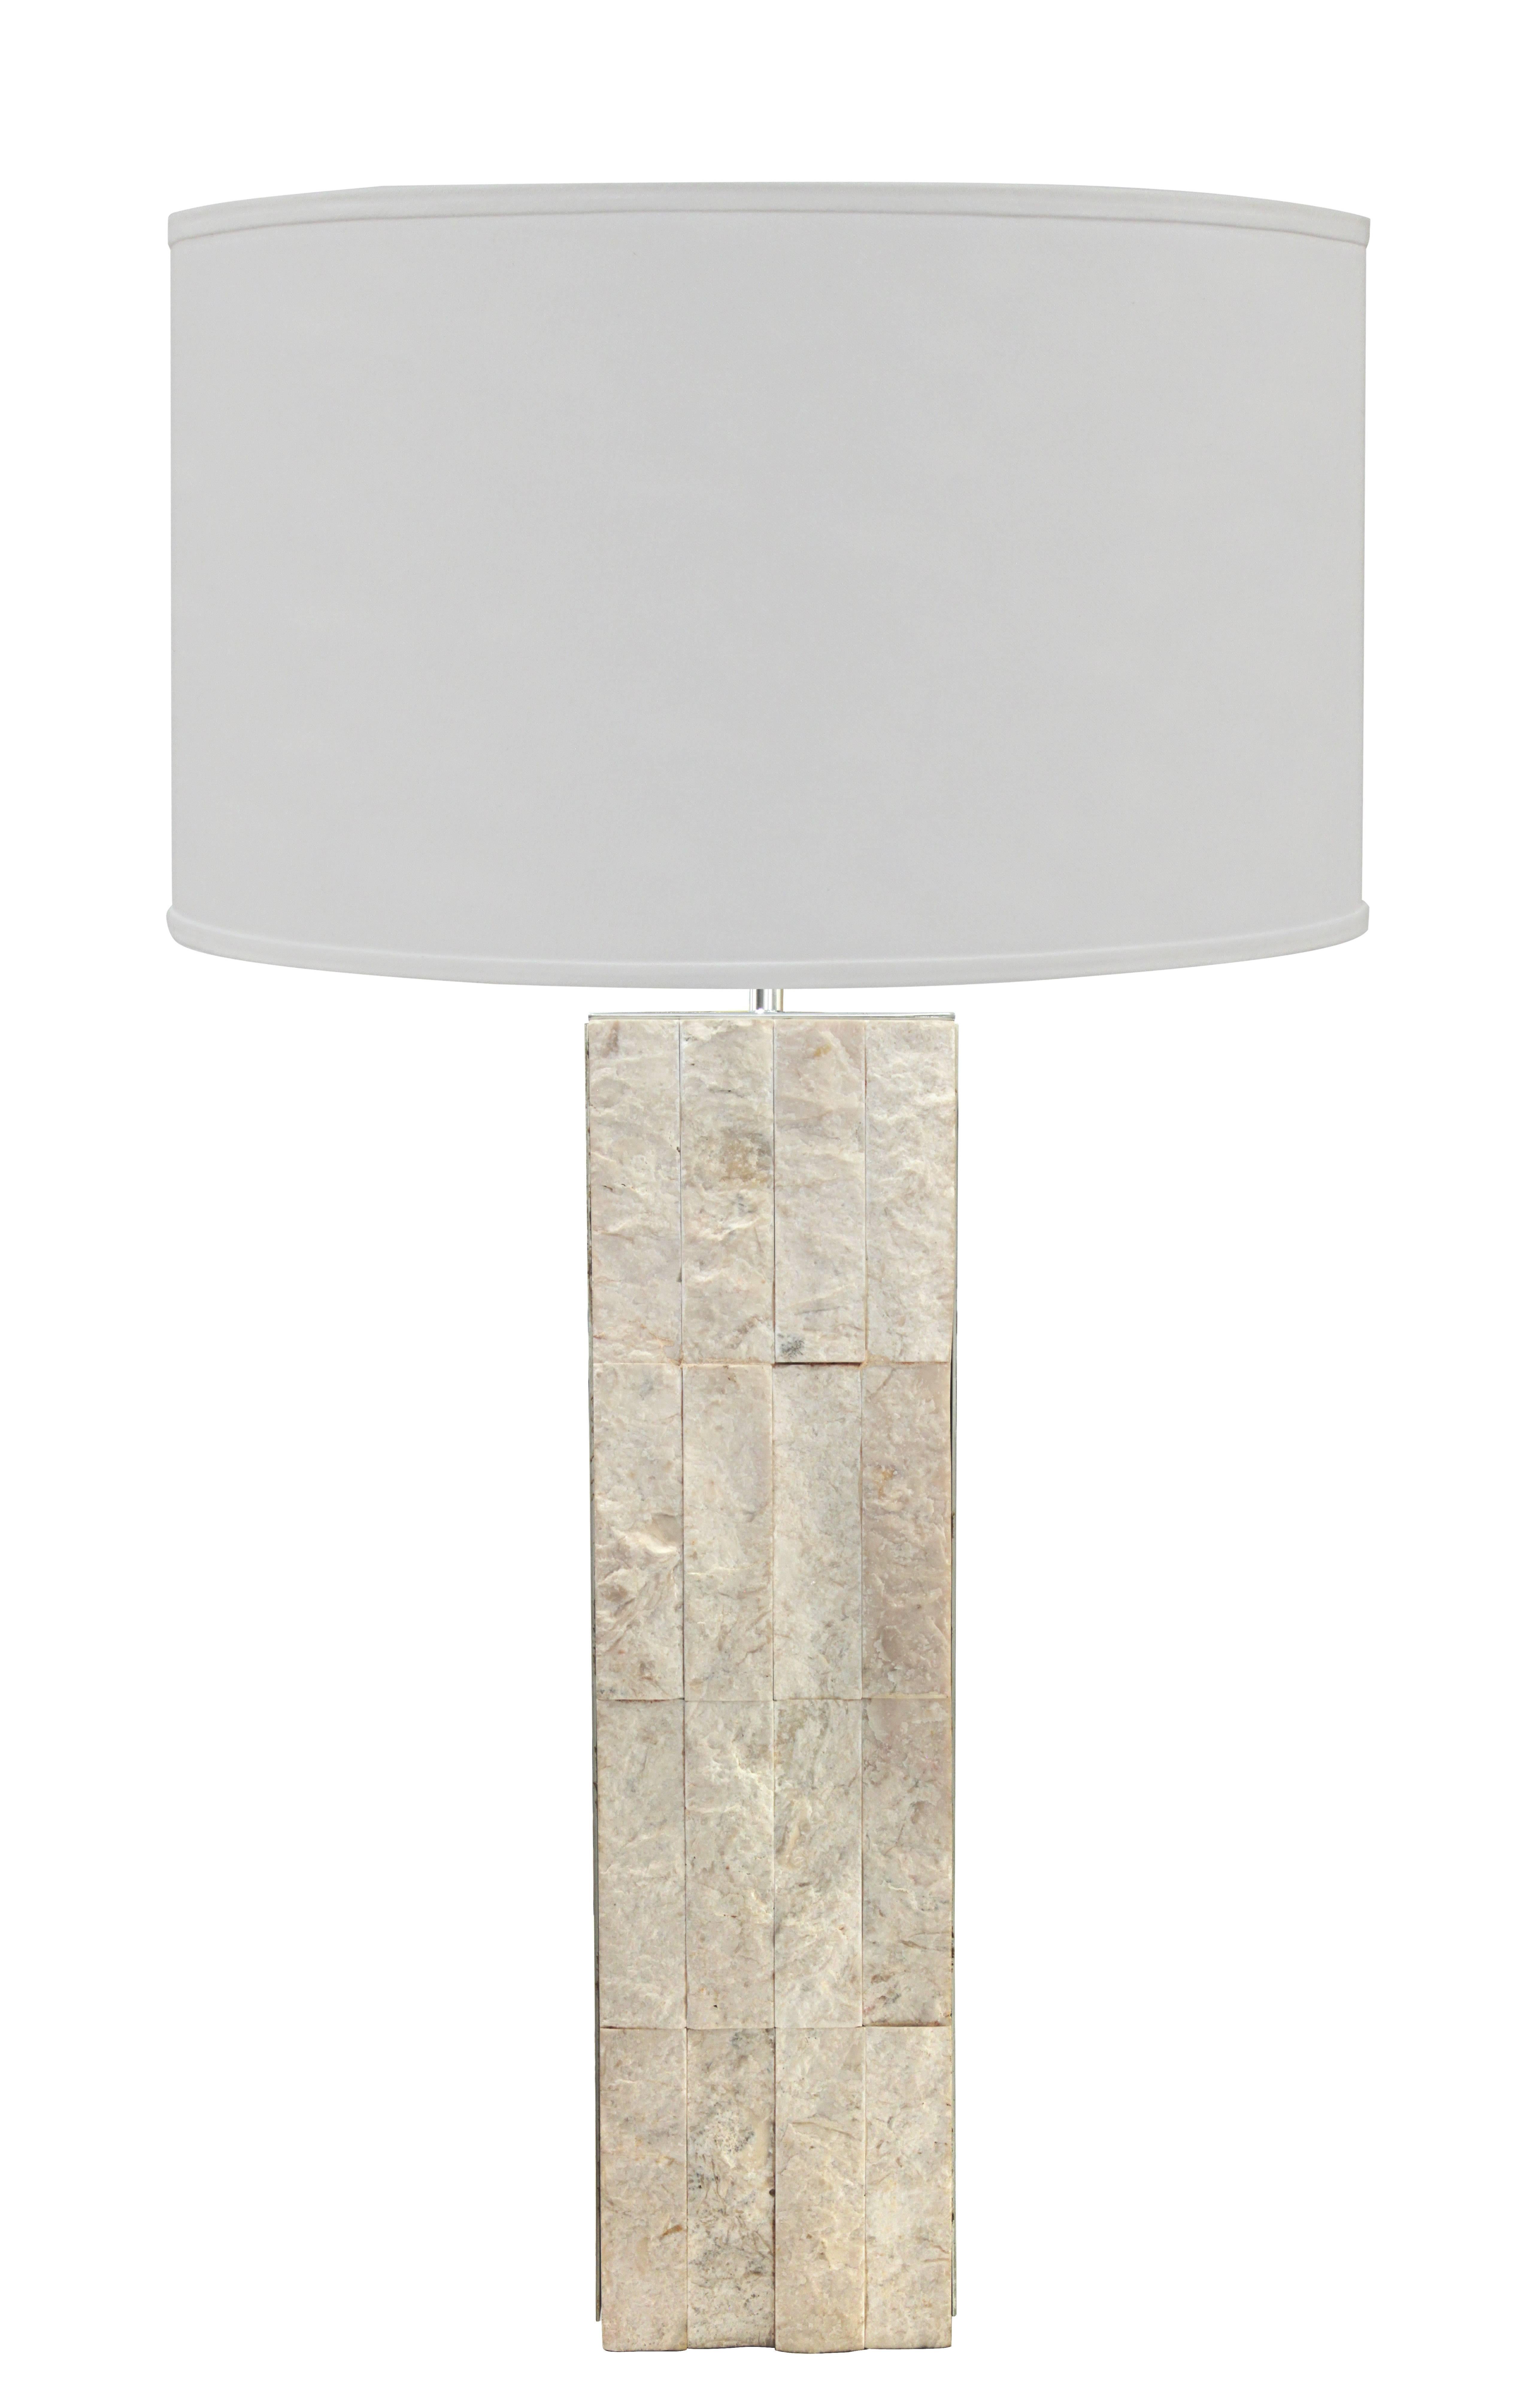 Pair of table lamps in ivory flagstone with brushed steel sides, American, 1970s.
Shades shown in images are 18 inches in diameter.